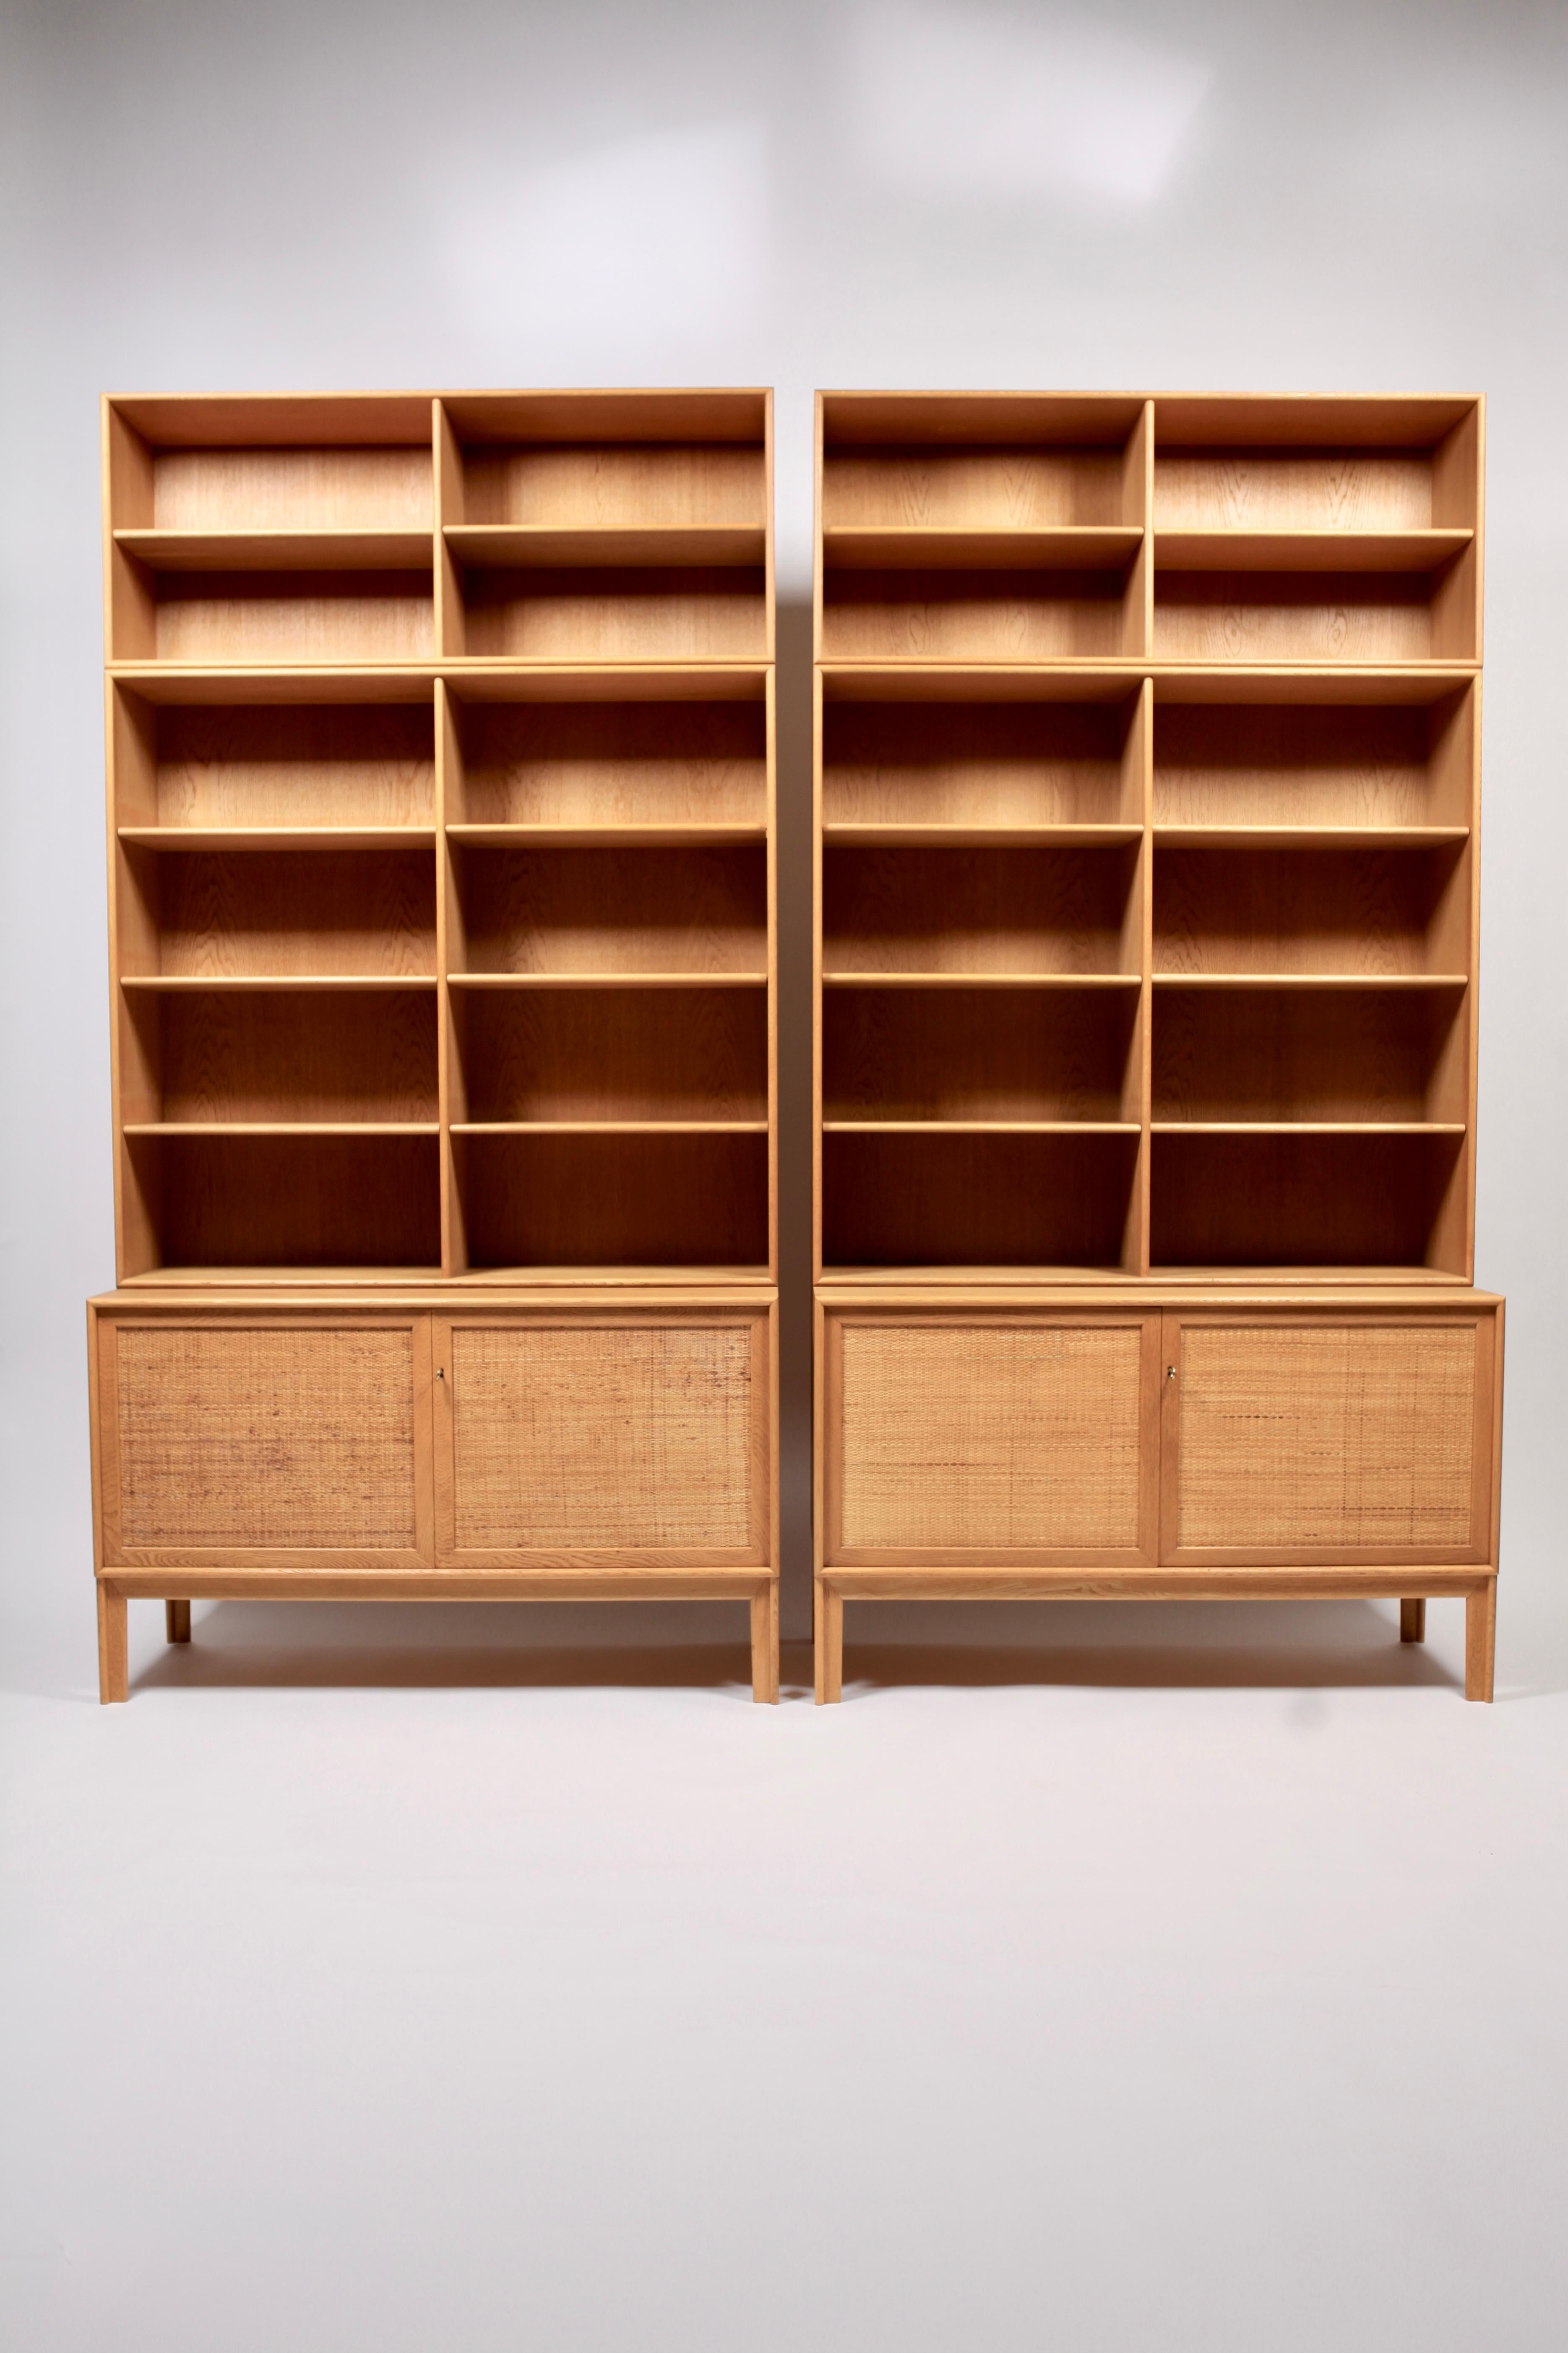 Alf Svensson, sideboards with bookcases, in oak and rattan, manufactured by Bjästa Möbelfabrik in Sweden in 1950s.
Excellent vintage condition with very nice patina and minor signs of usage.
Original keys included.
Interior with shelves and